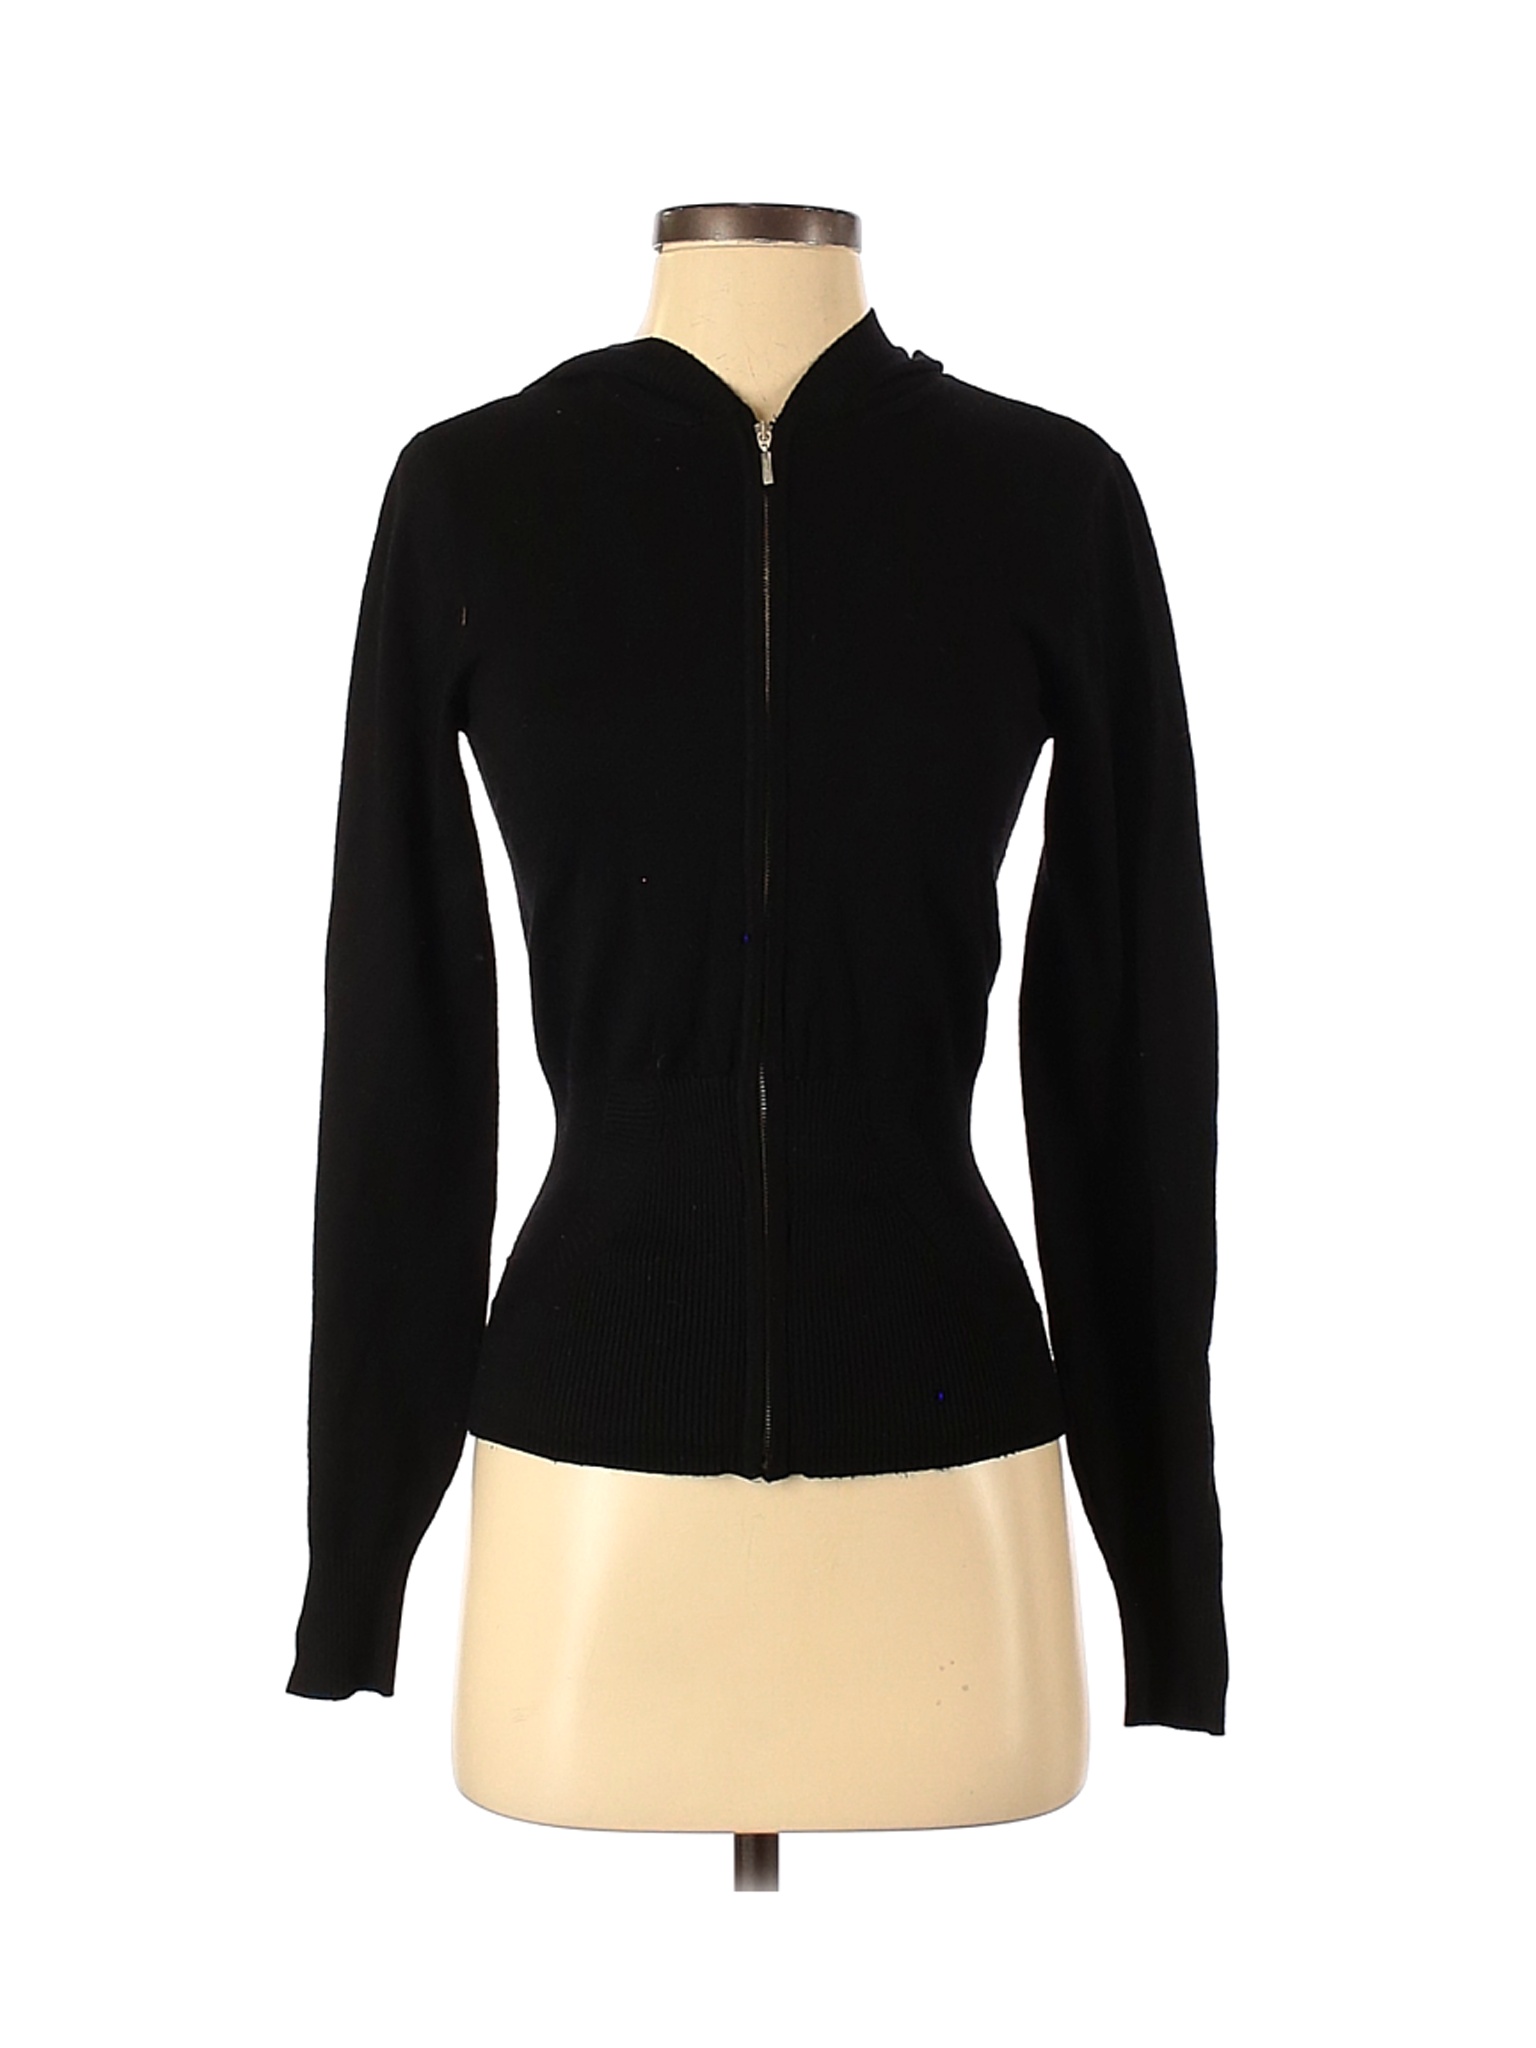 Daisy Fuentes Solid Black Pullover Hoodie Size S - 58% off | thredUP